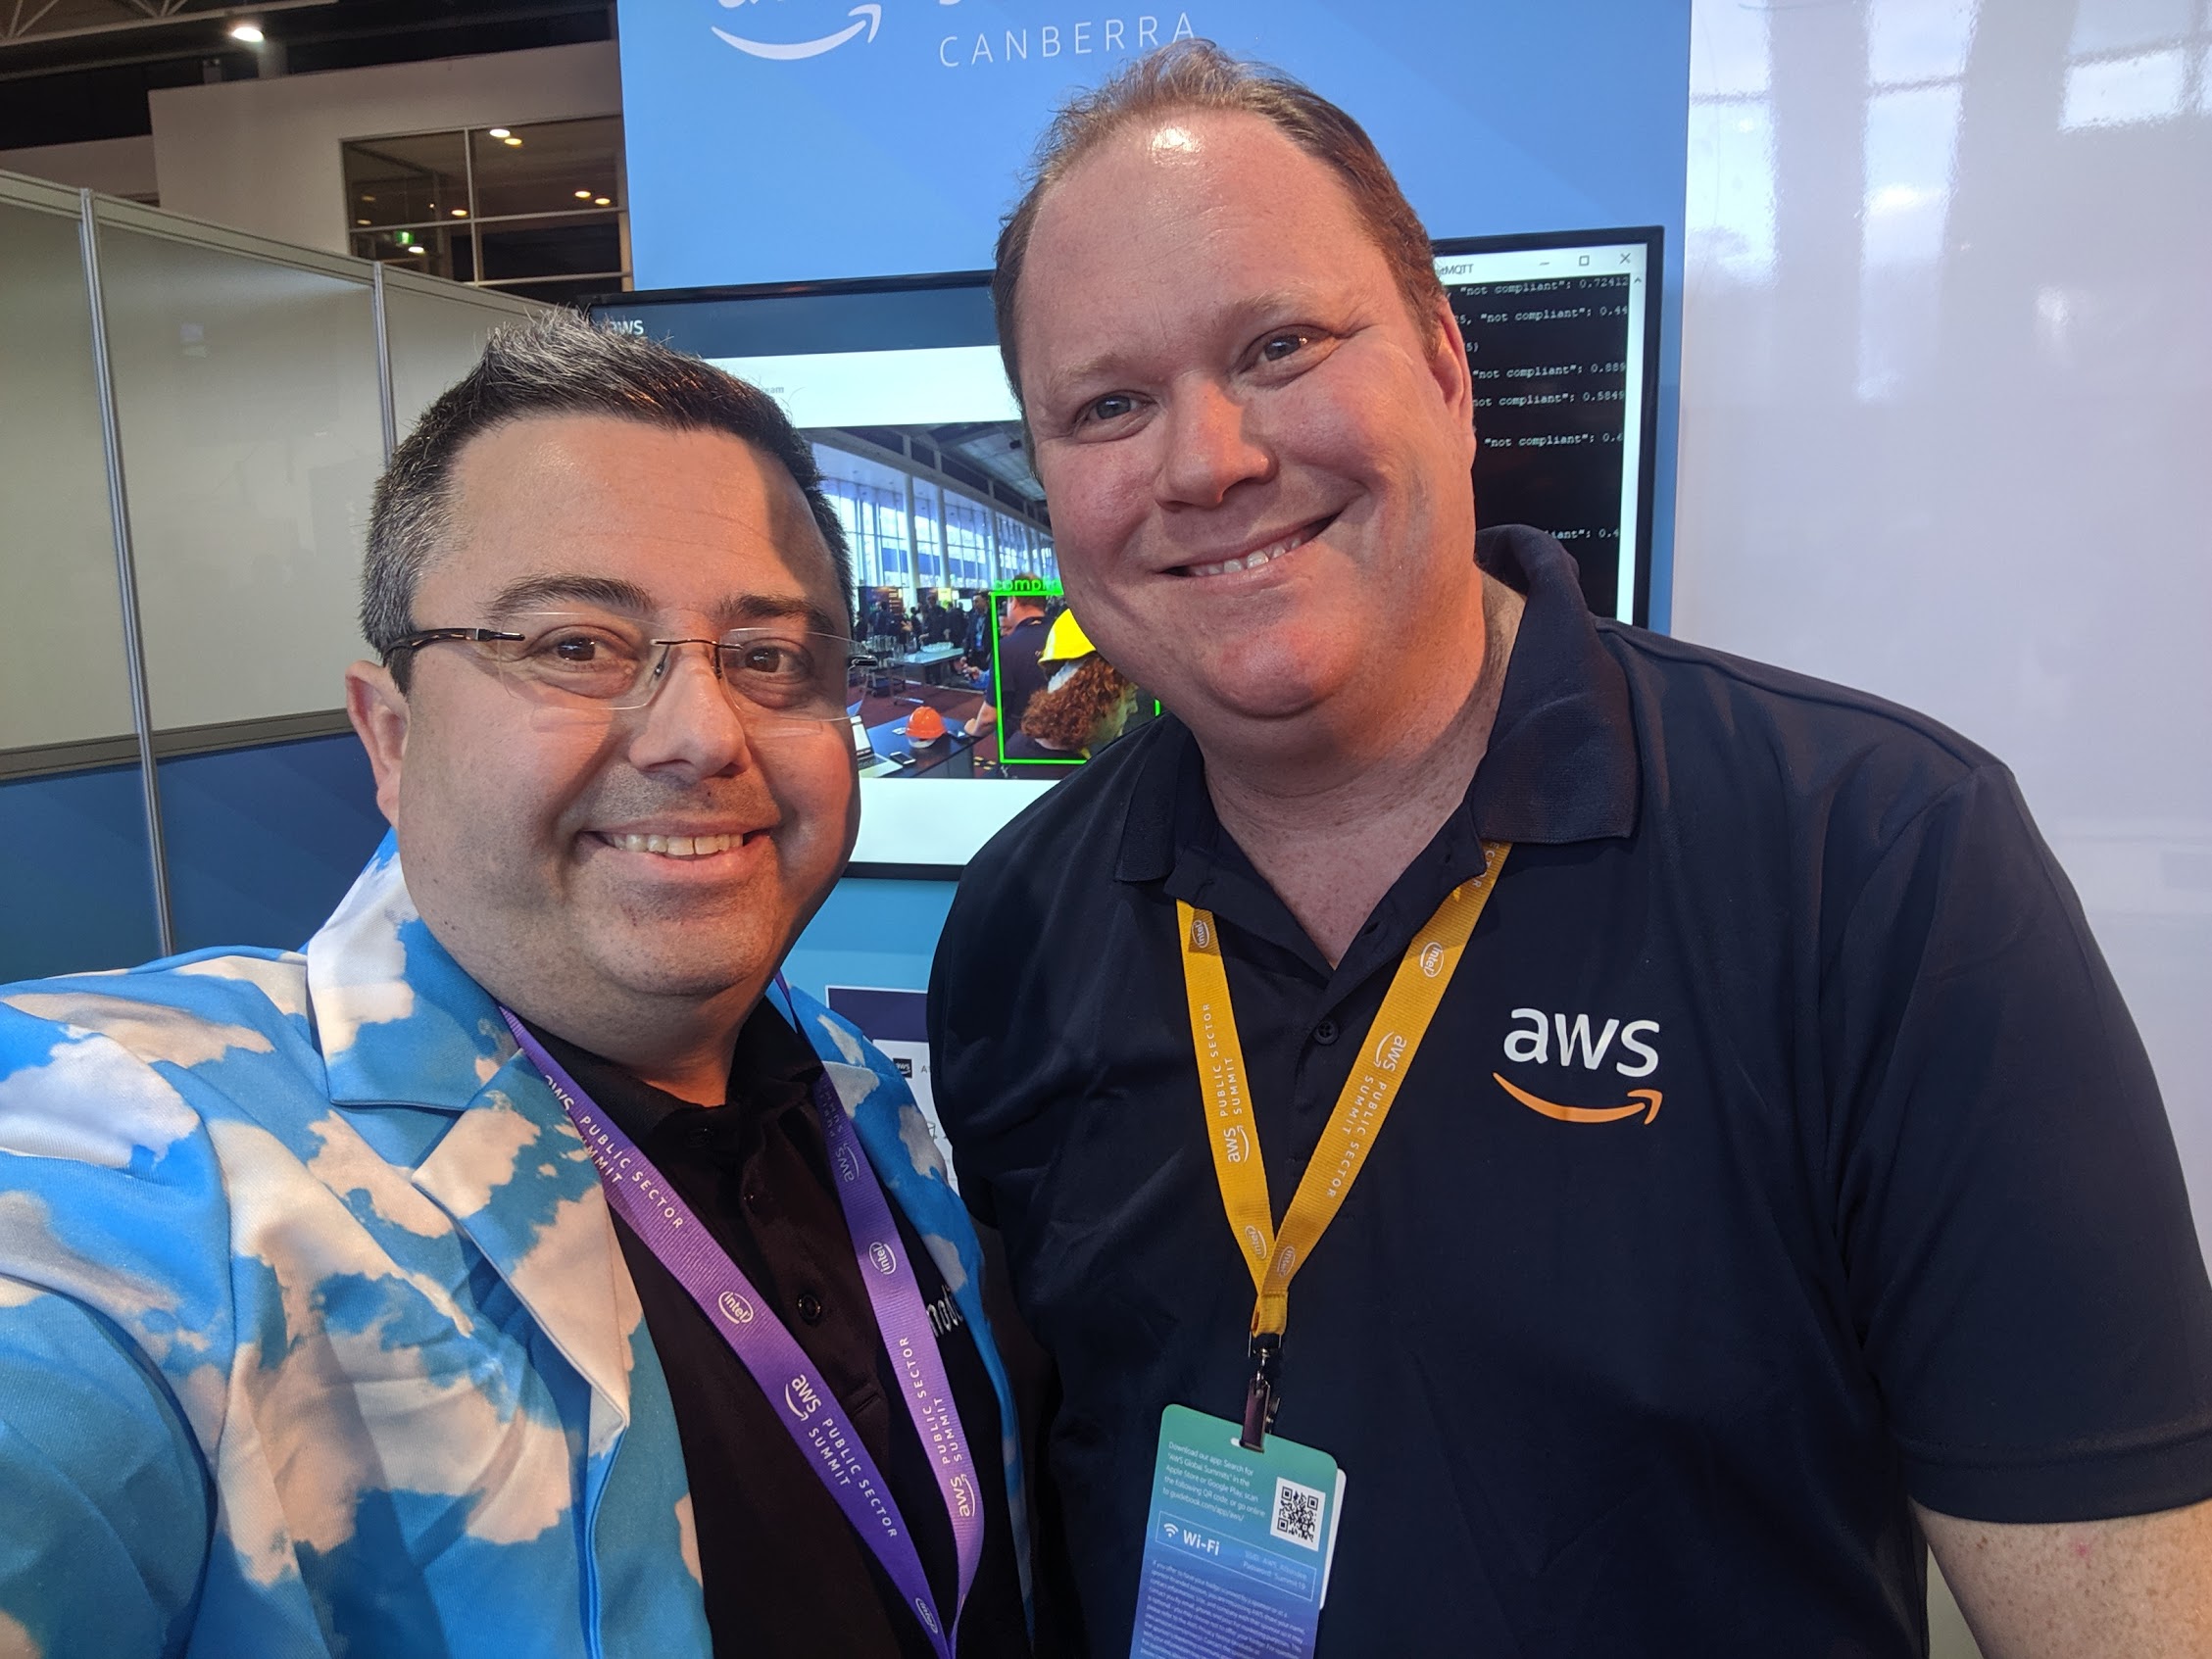 AWS Public Sector Summit, Canberra 2019